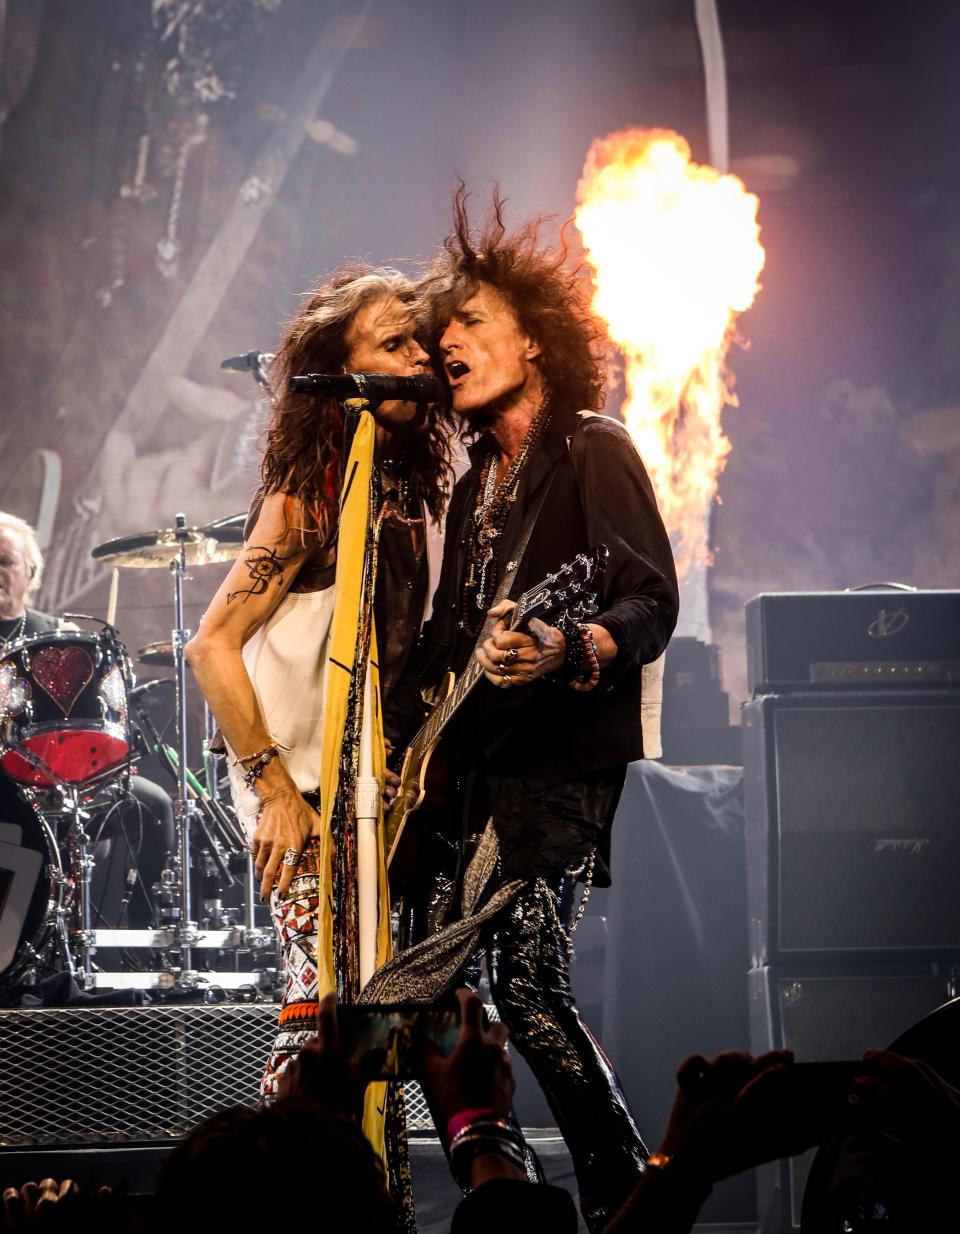 Steven Tyler (left) and Joe Perry of Aerosmith blaze the Dolby Live stage at Park MGM in Las Vegas. The band's Deuces are Wild residency resumes in June 2022.